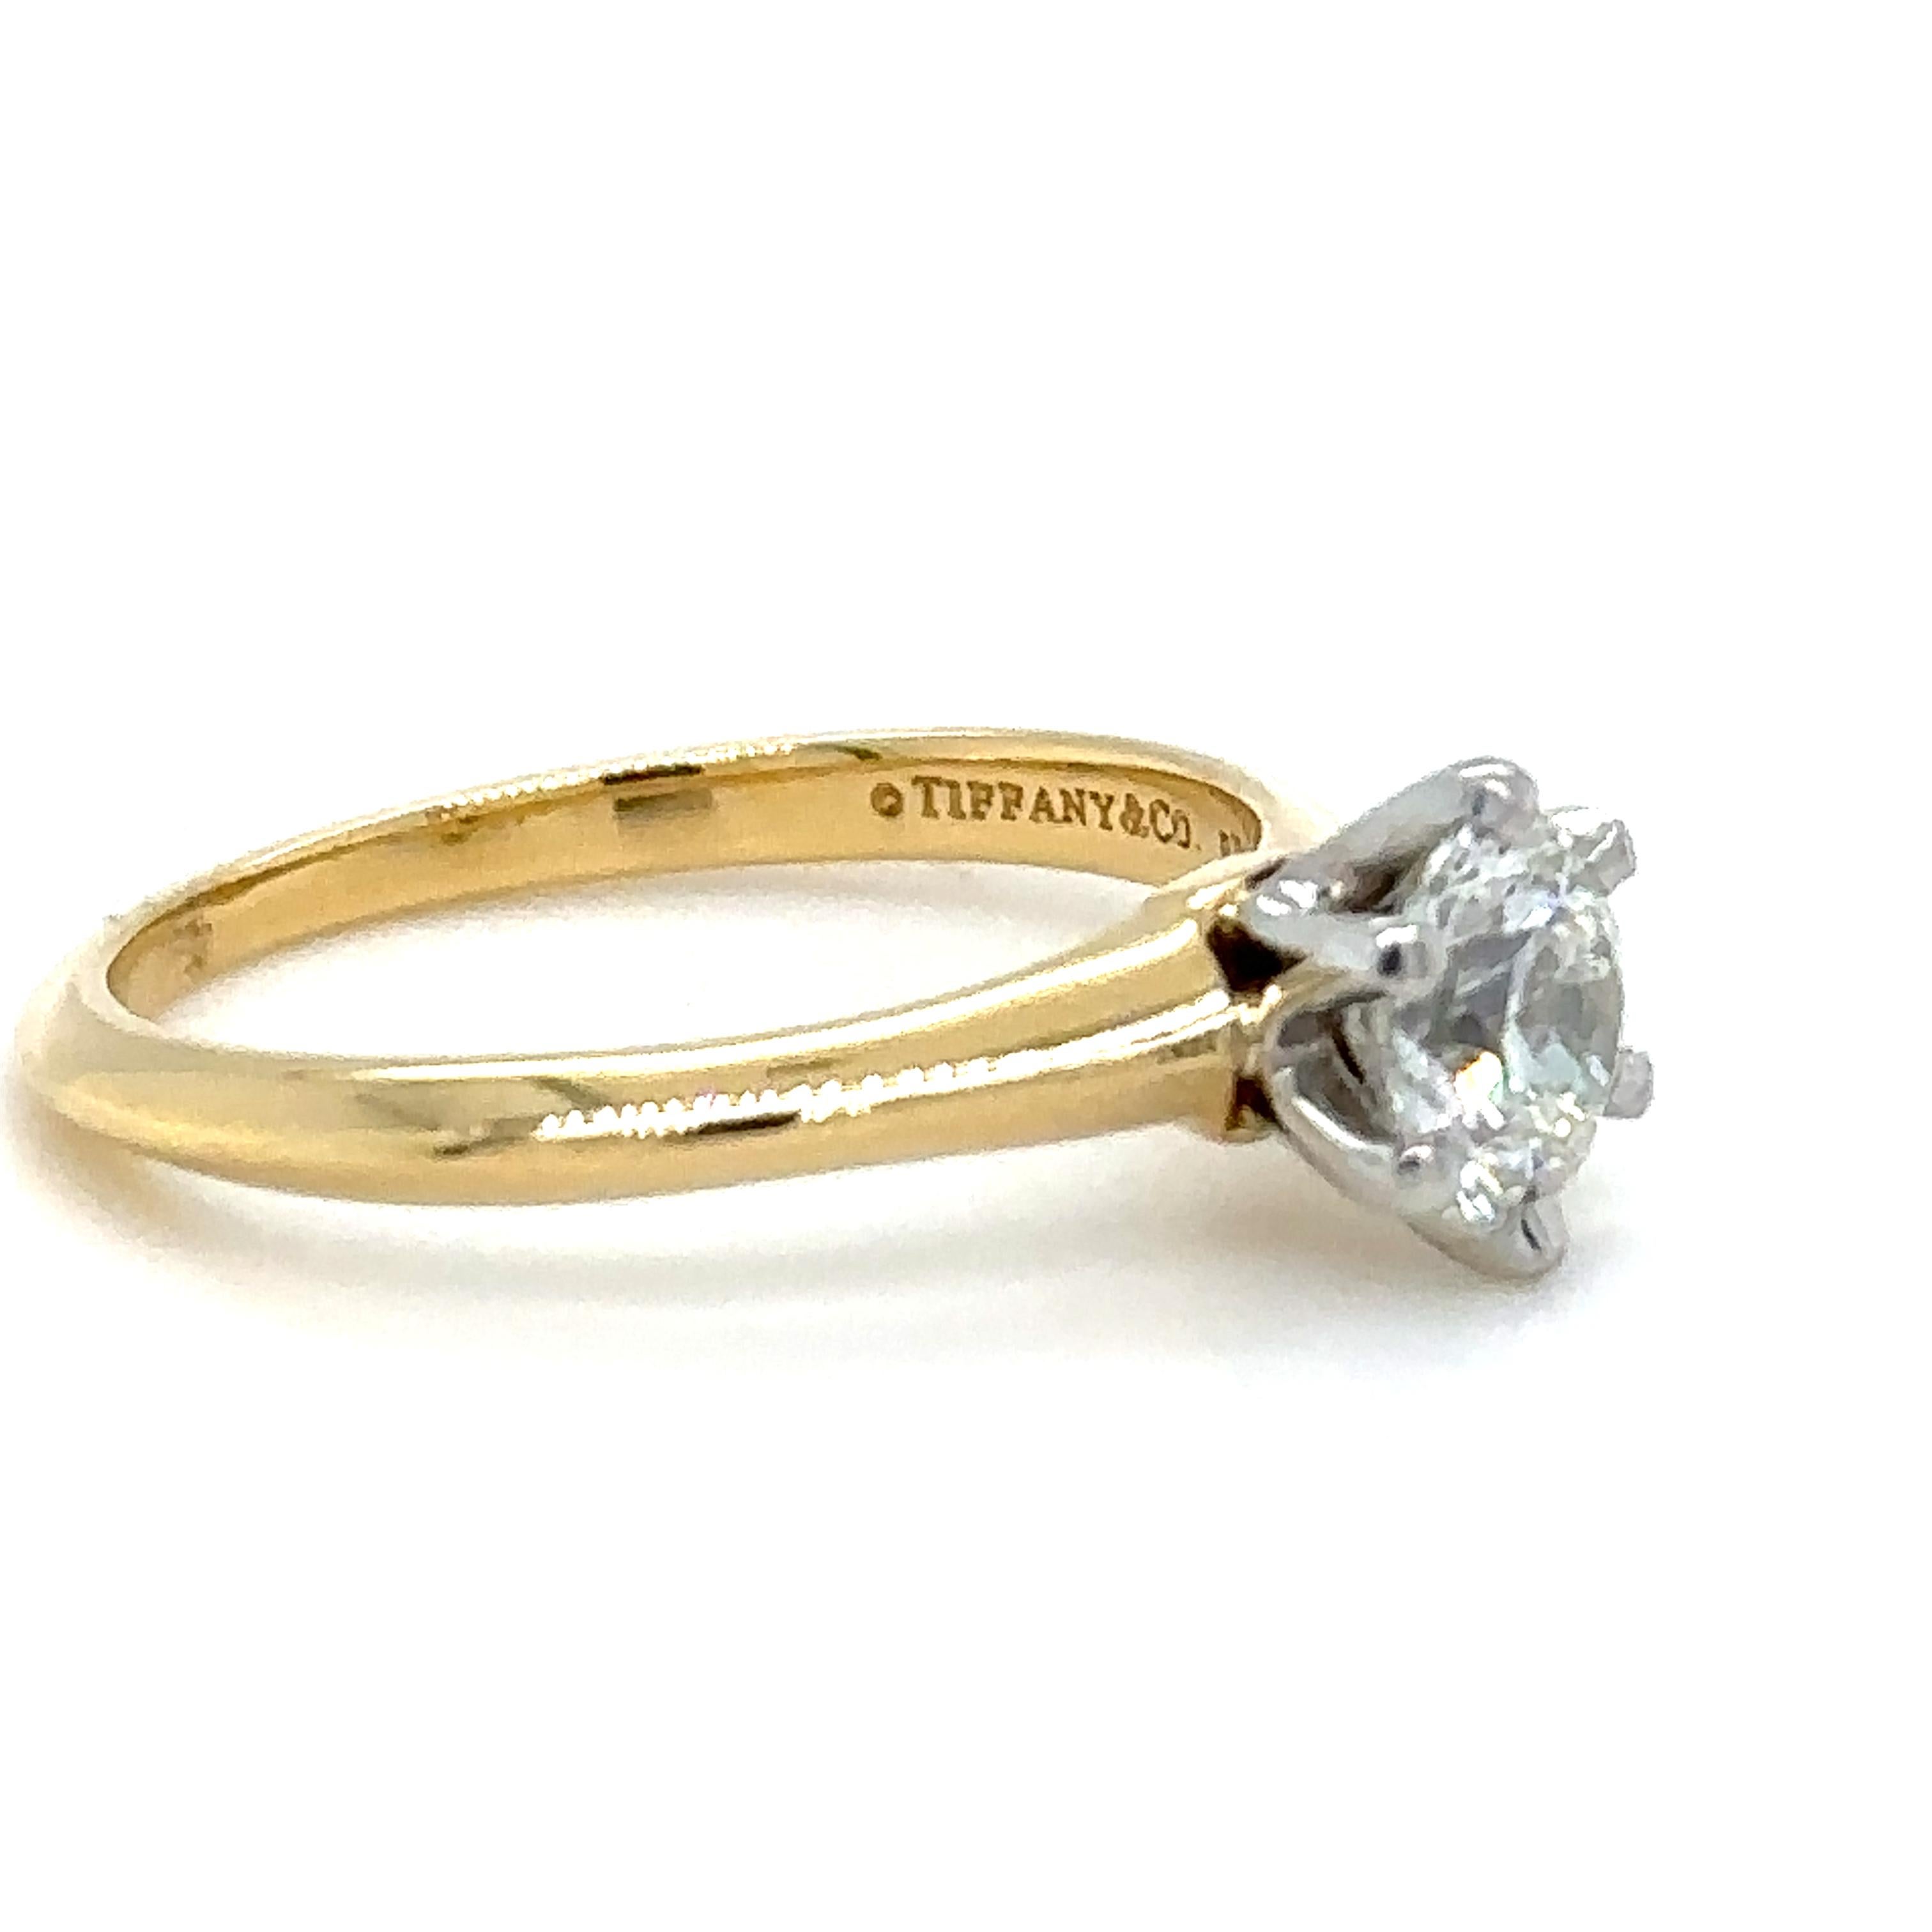 A Tiffany And Co Solitaire Round Brilliant Cut Diamond Ring, six claw set in platinum on 18ct yellow gold 1.6mm knife edge band.

Diamond 0.82ct, Laser engraved number on star facet: F02120284, Serial number on band 18695359.

No Tiffany & Co